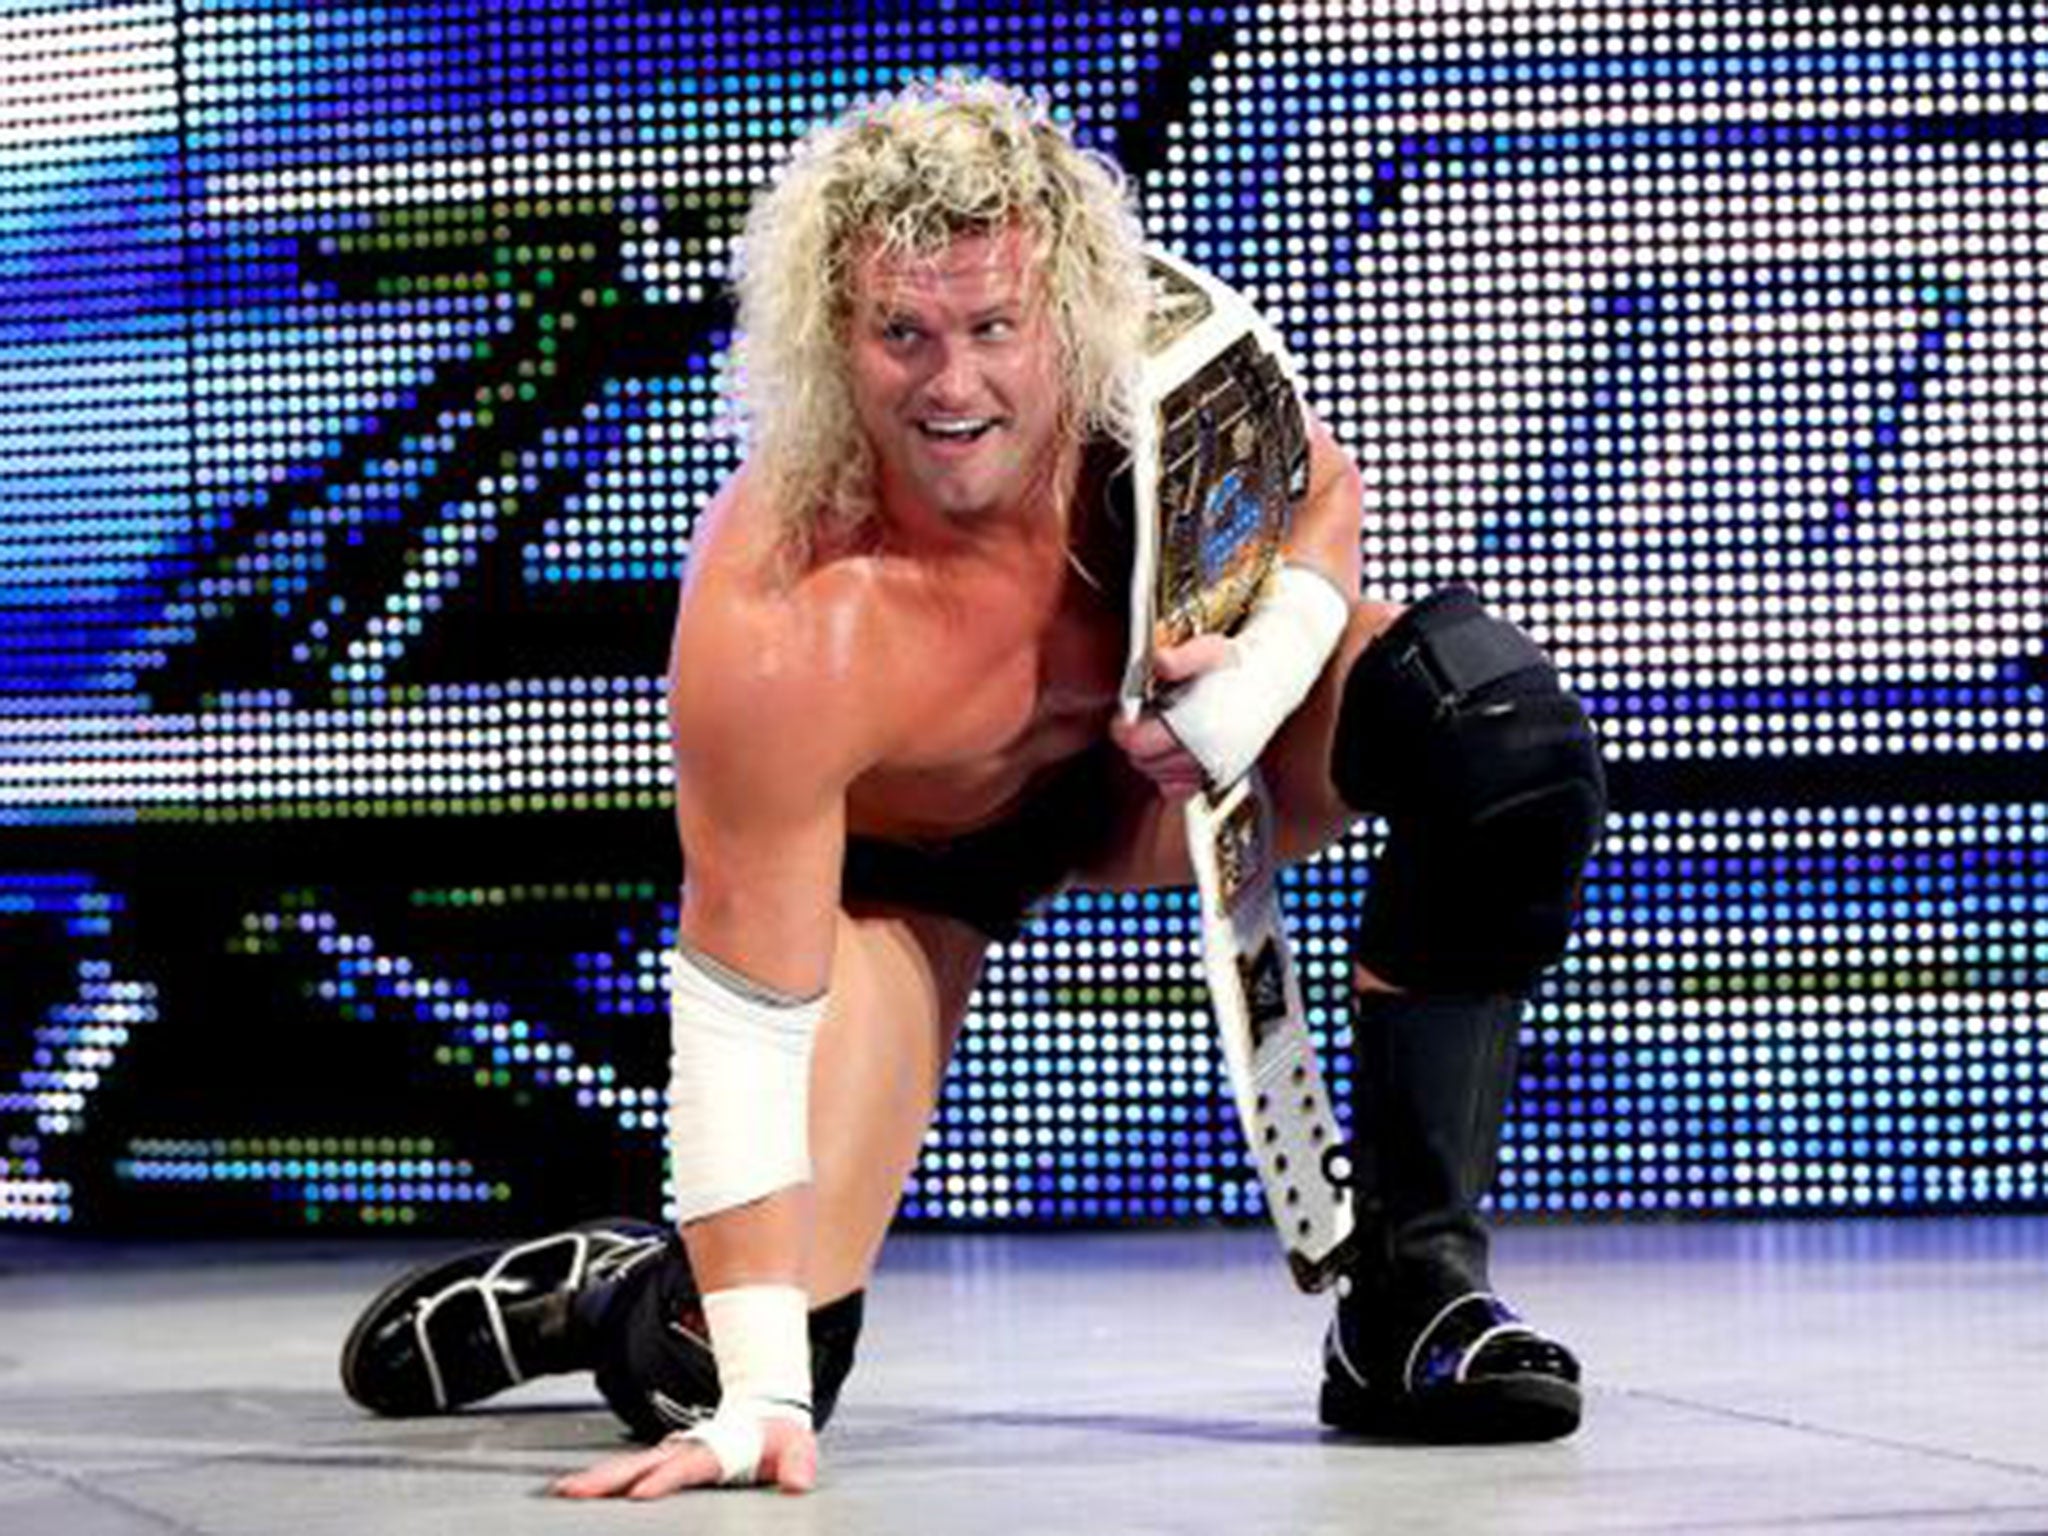 Dolph Ziggler managed to see off the challenge of Seth Rollins